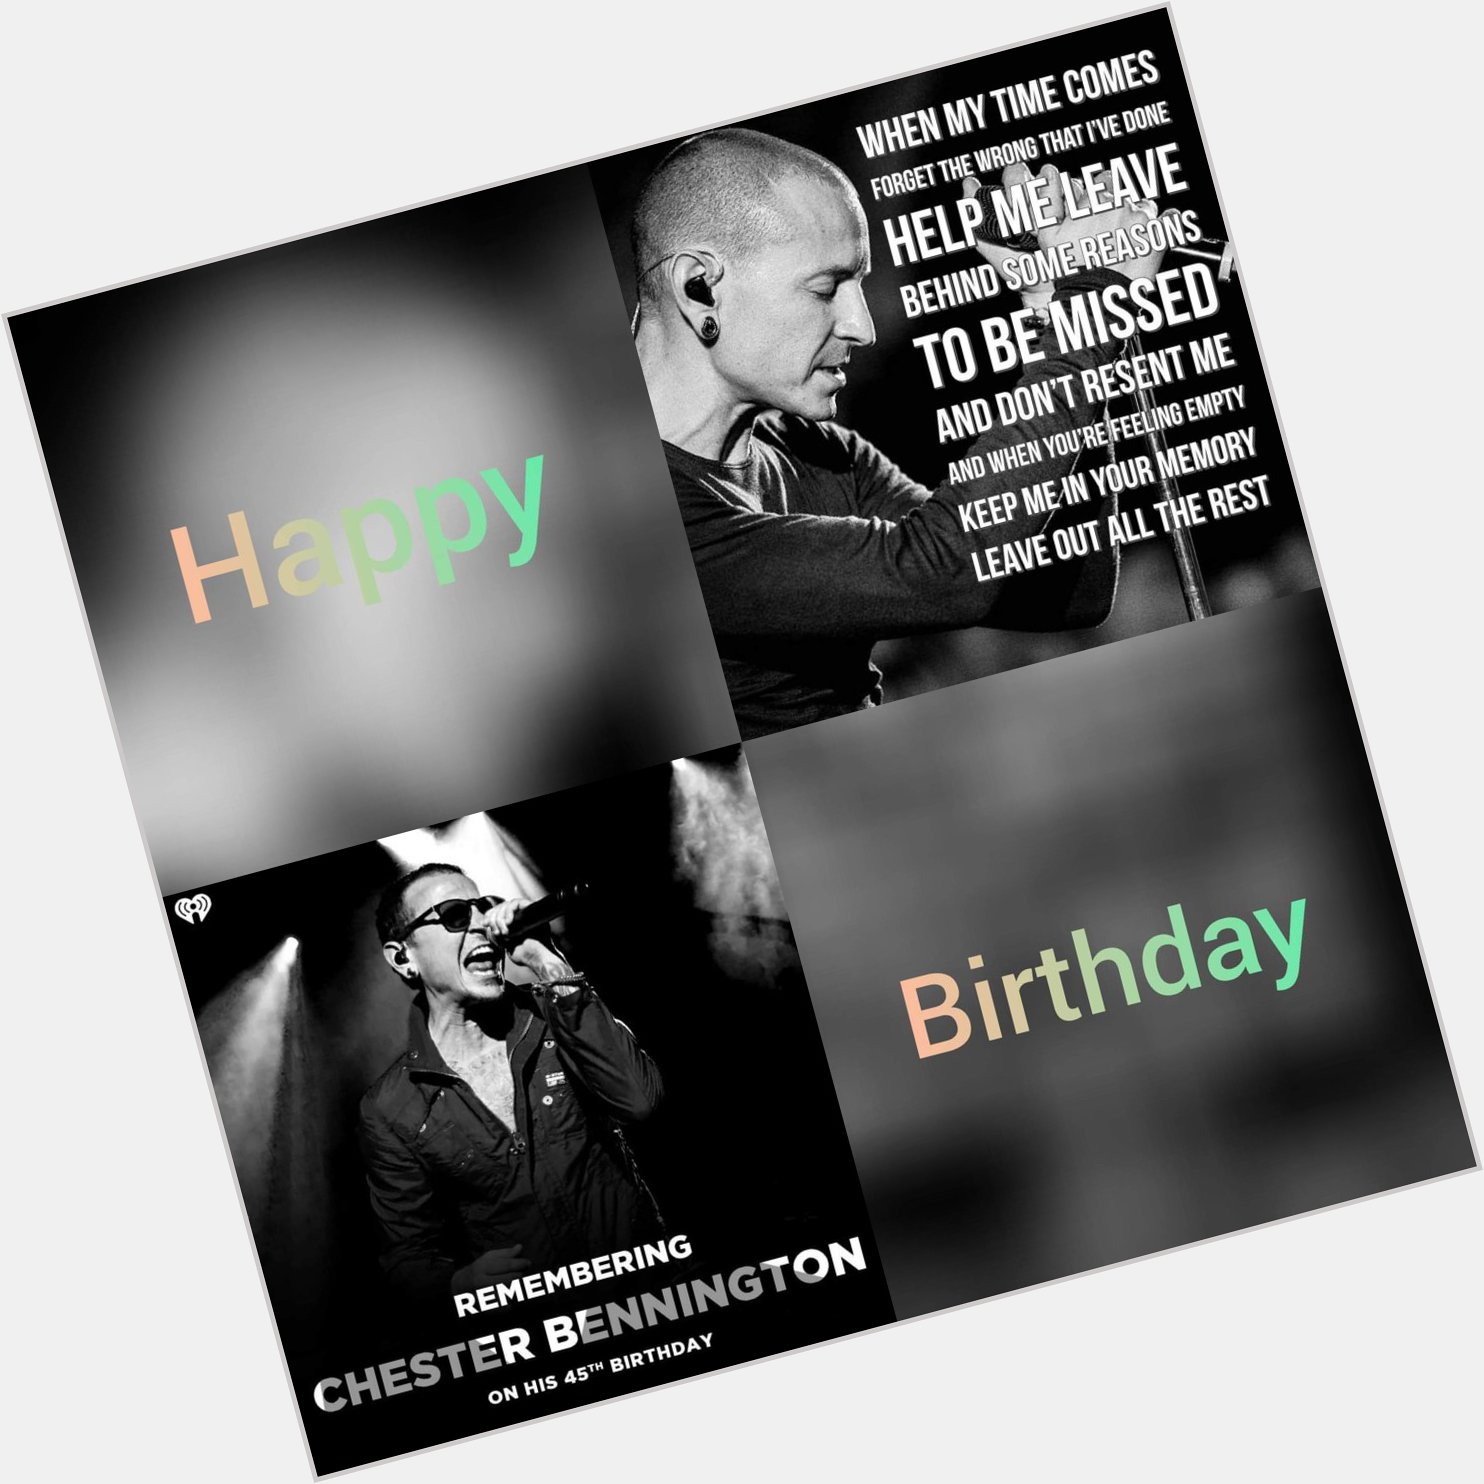 Yesterday was Chester Bennington birthday we are late posting this but happy birthday to our angel Chester   